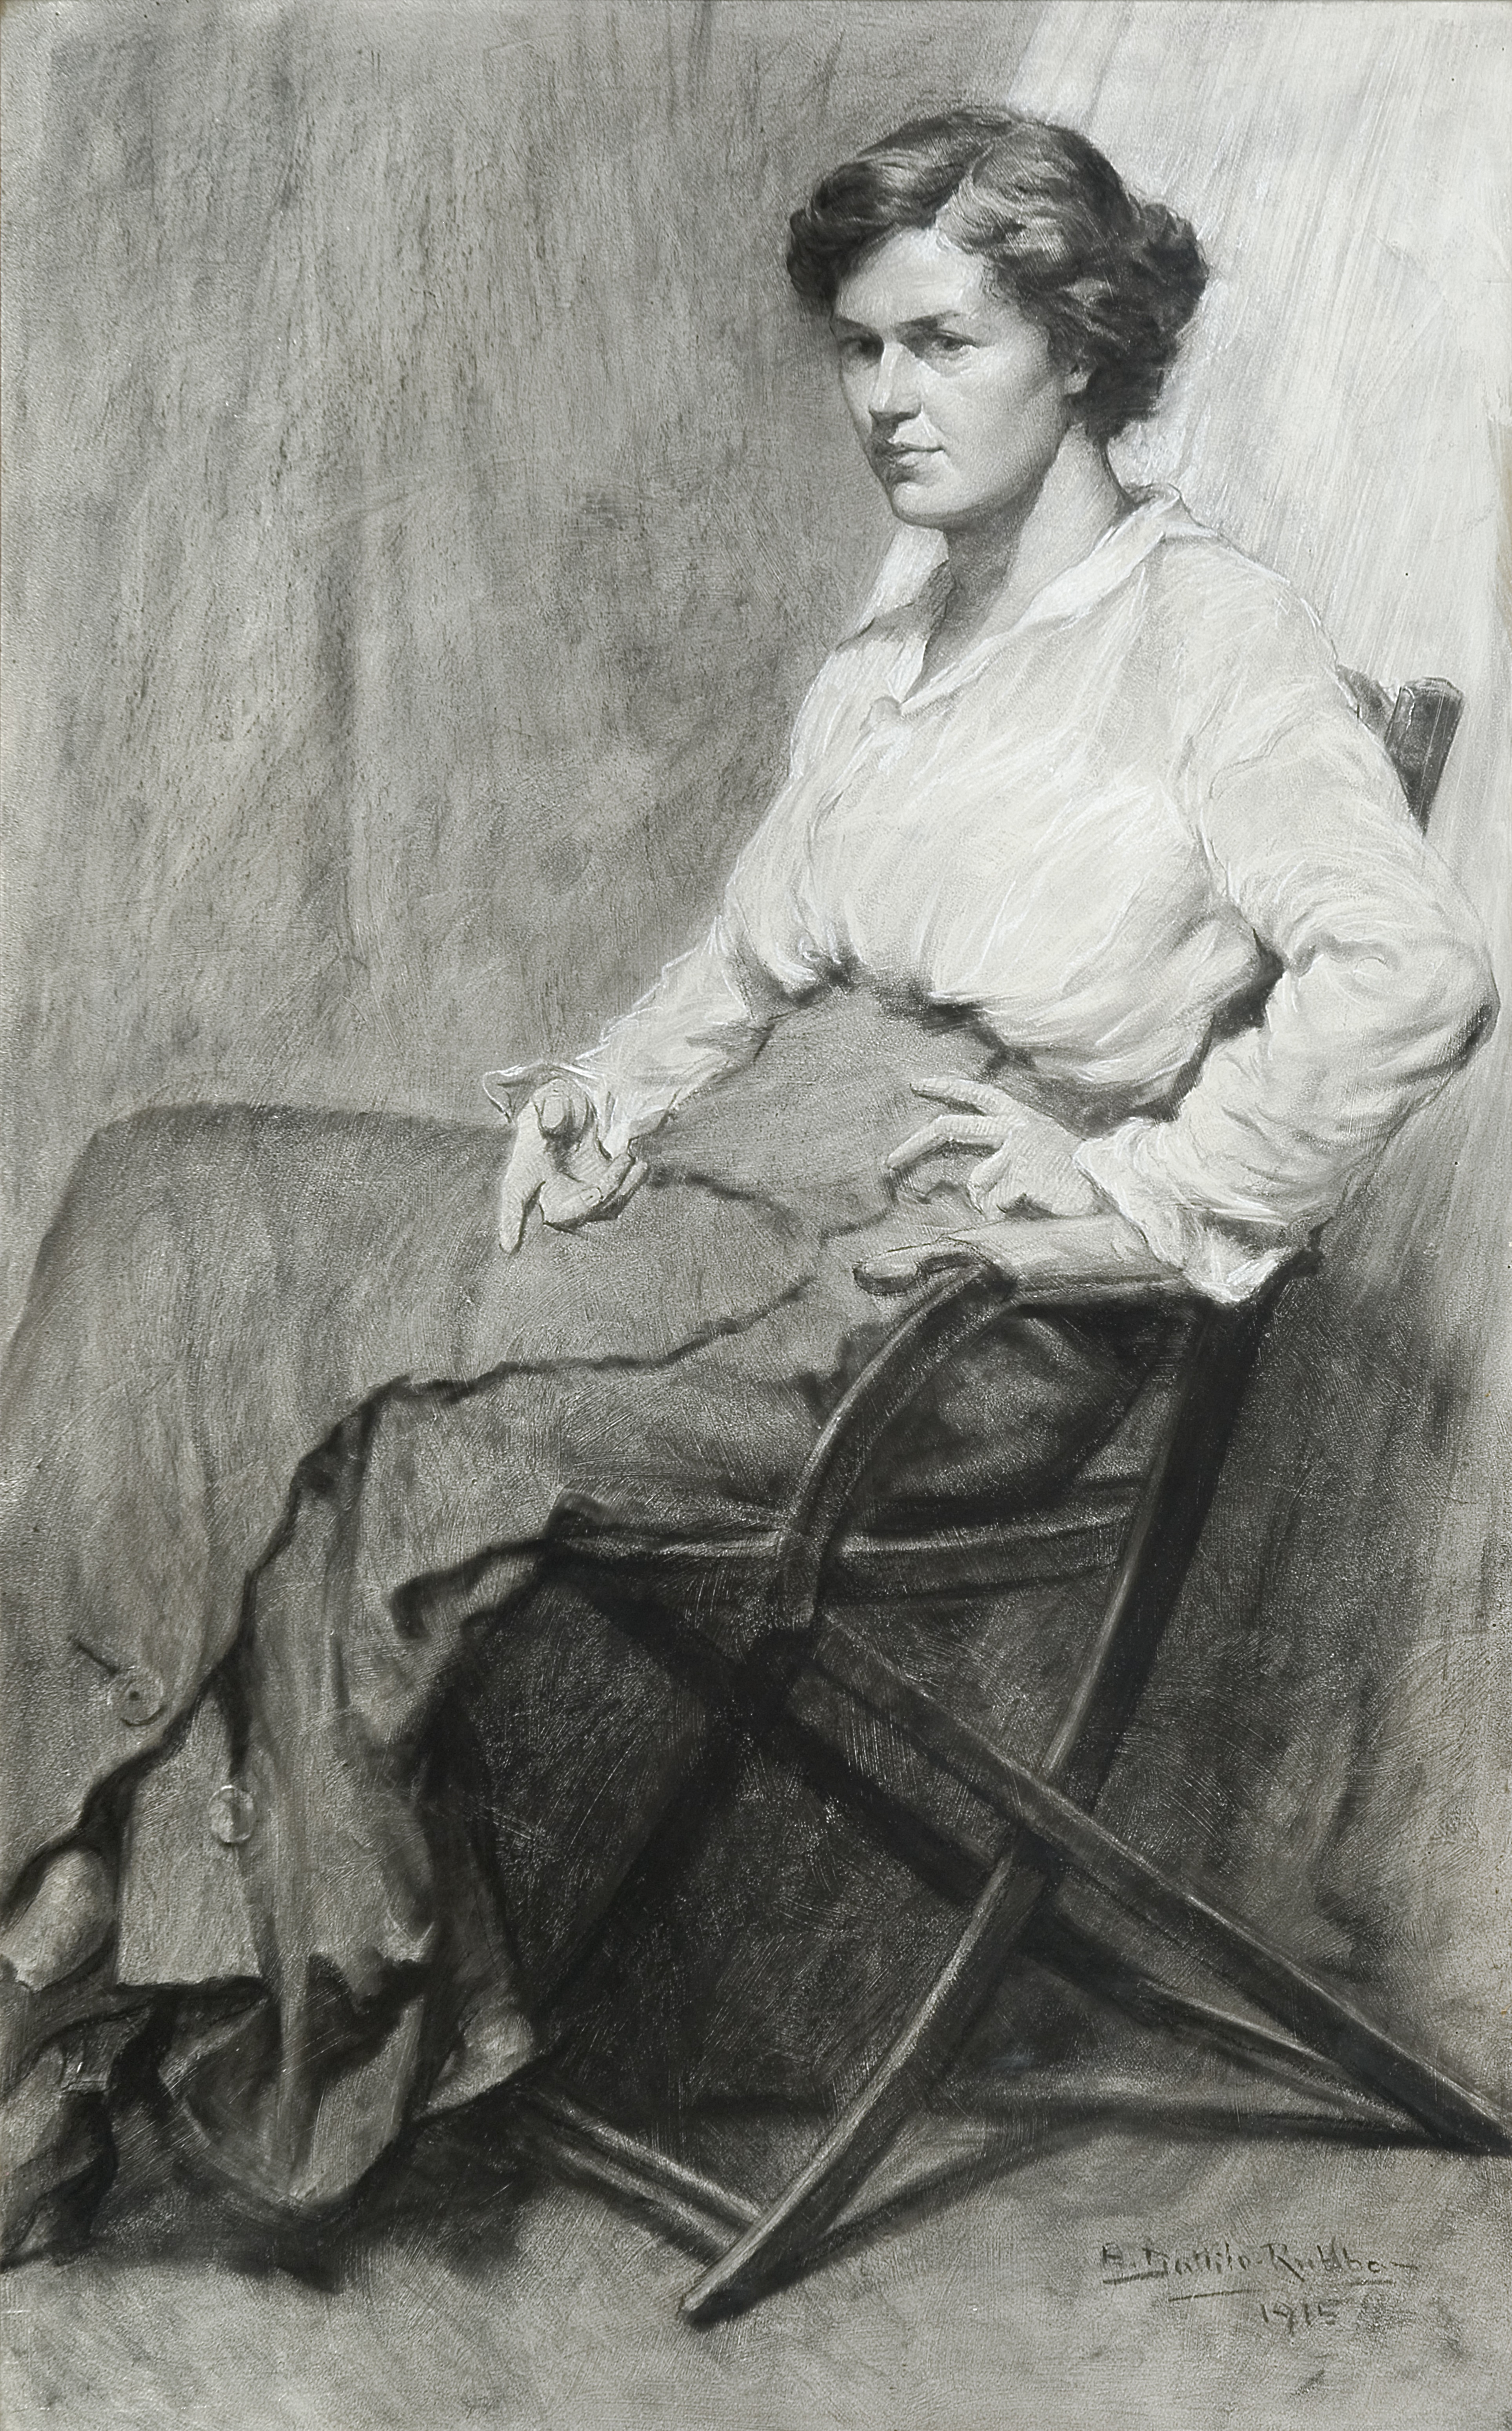 Anthony_Dattilo-Rubbo_Portrait_of_Norah_Simpson_1915_pencil_on_paper_122_x_76cm._MAGM_Collection_-_Gift_of_the_artist_1940.jpg